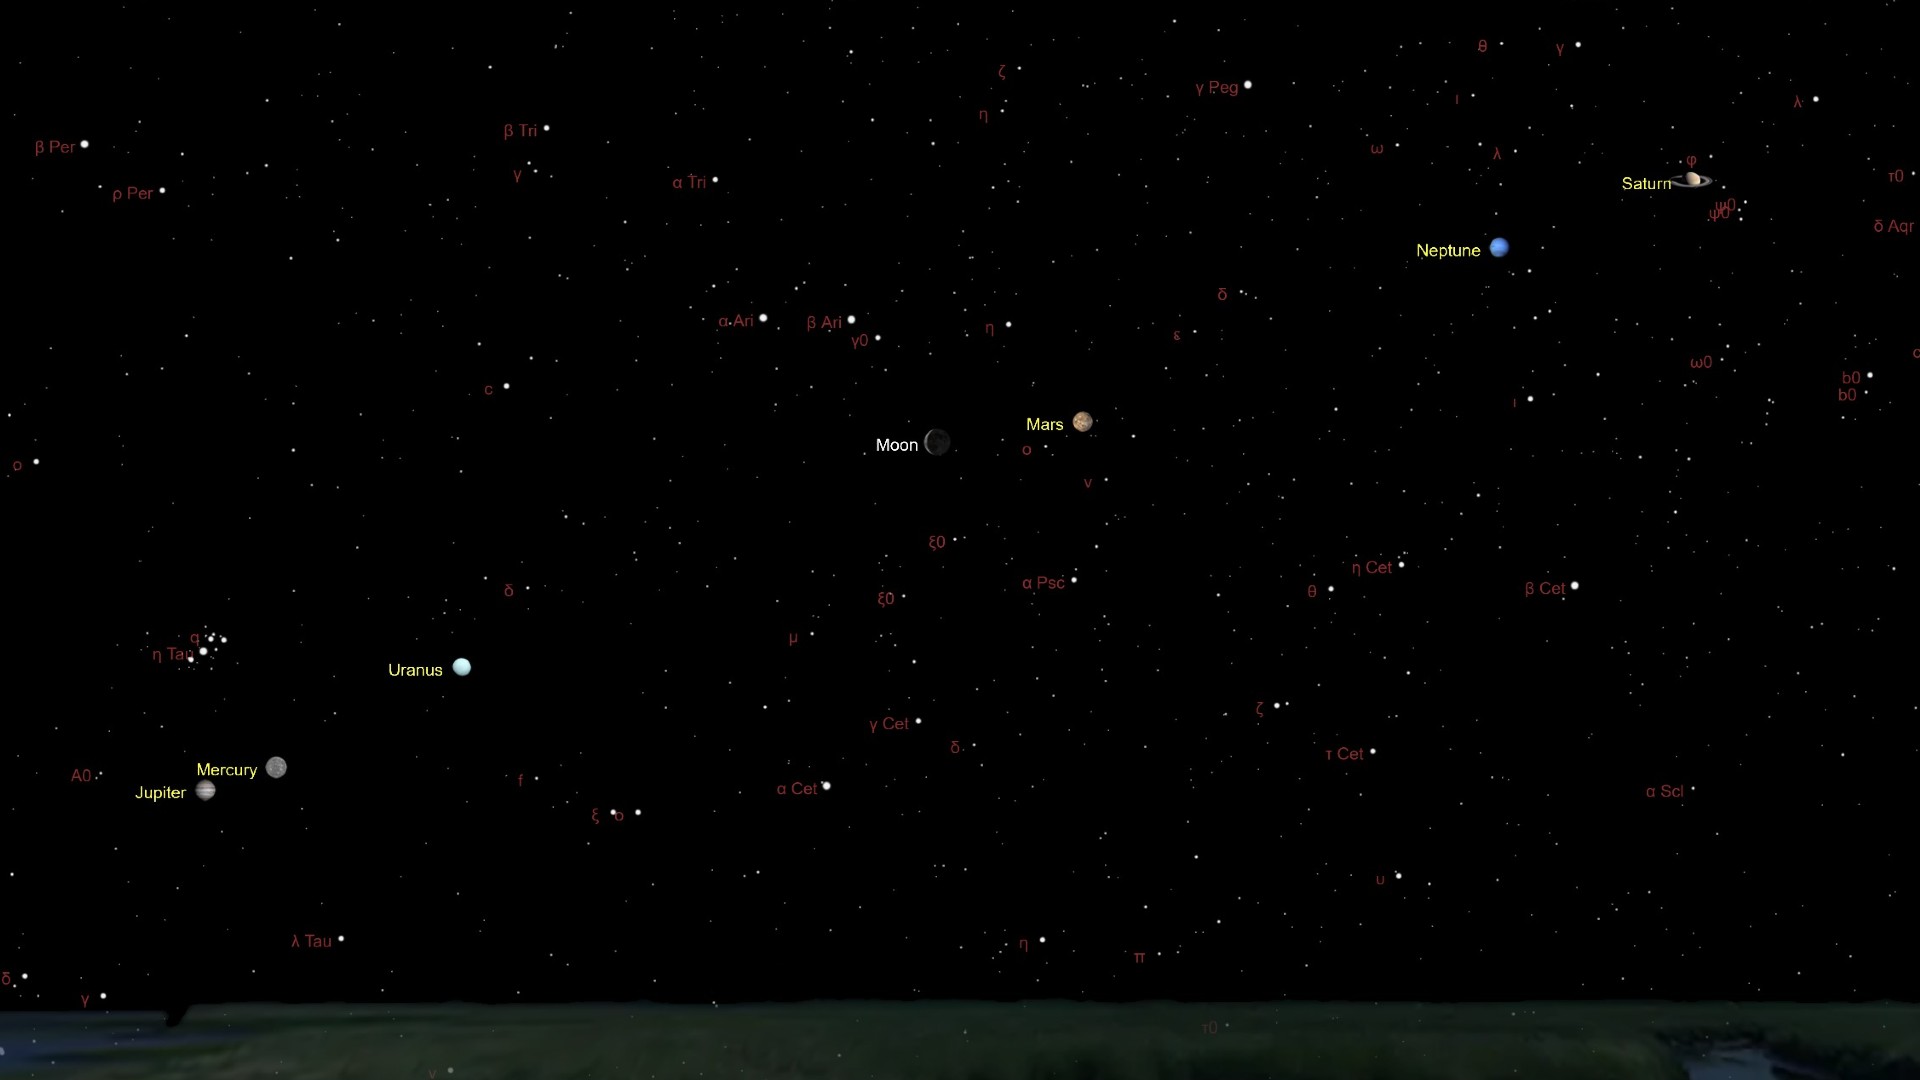 Will a ‘rare’ lineup of planets be visible to the naked eye in the night sky on June 3? Space